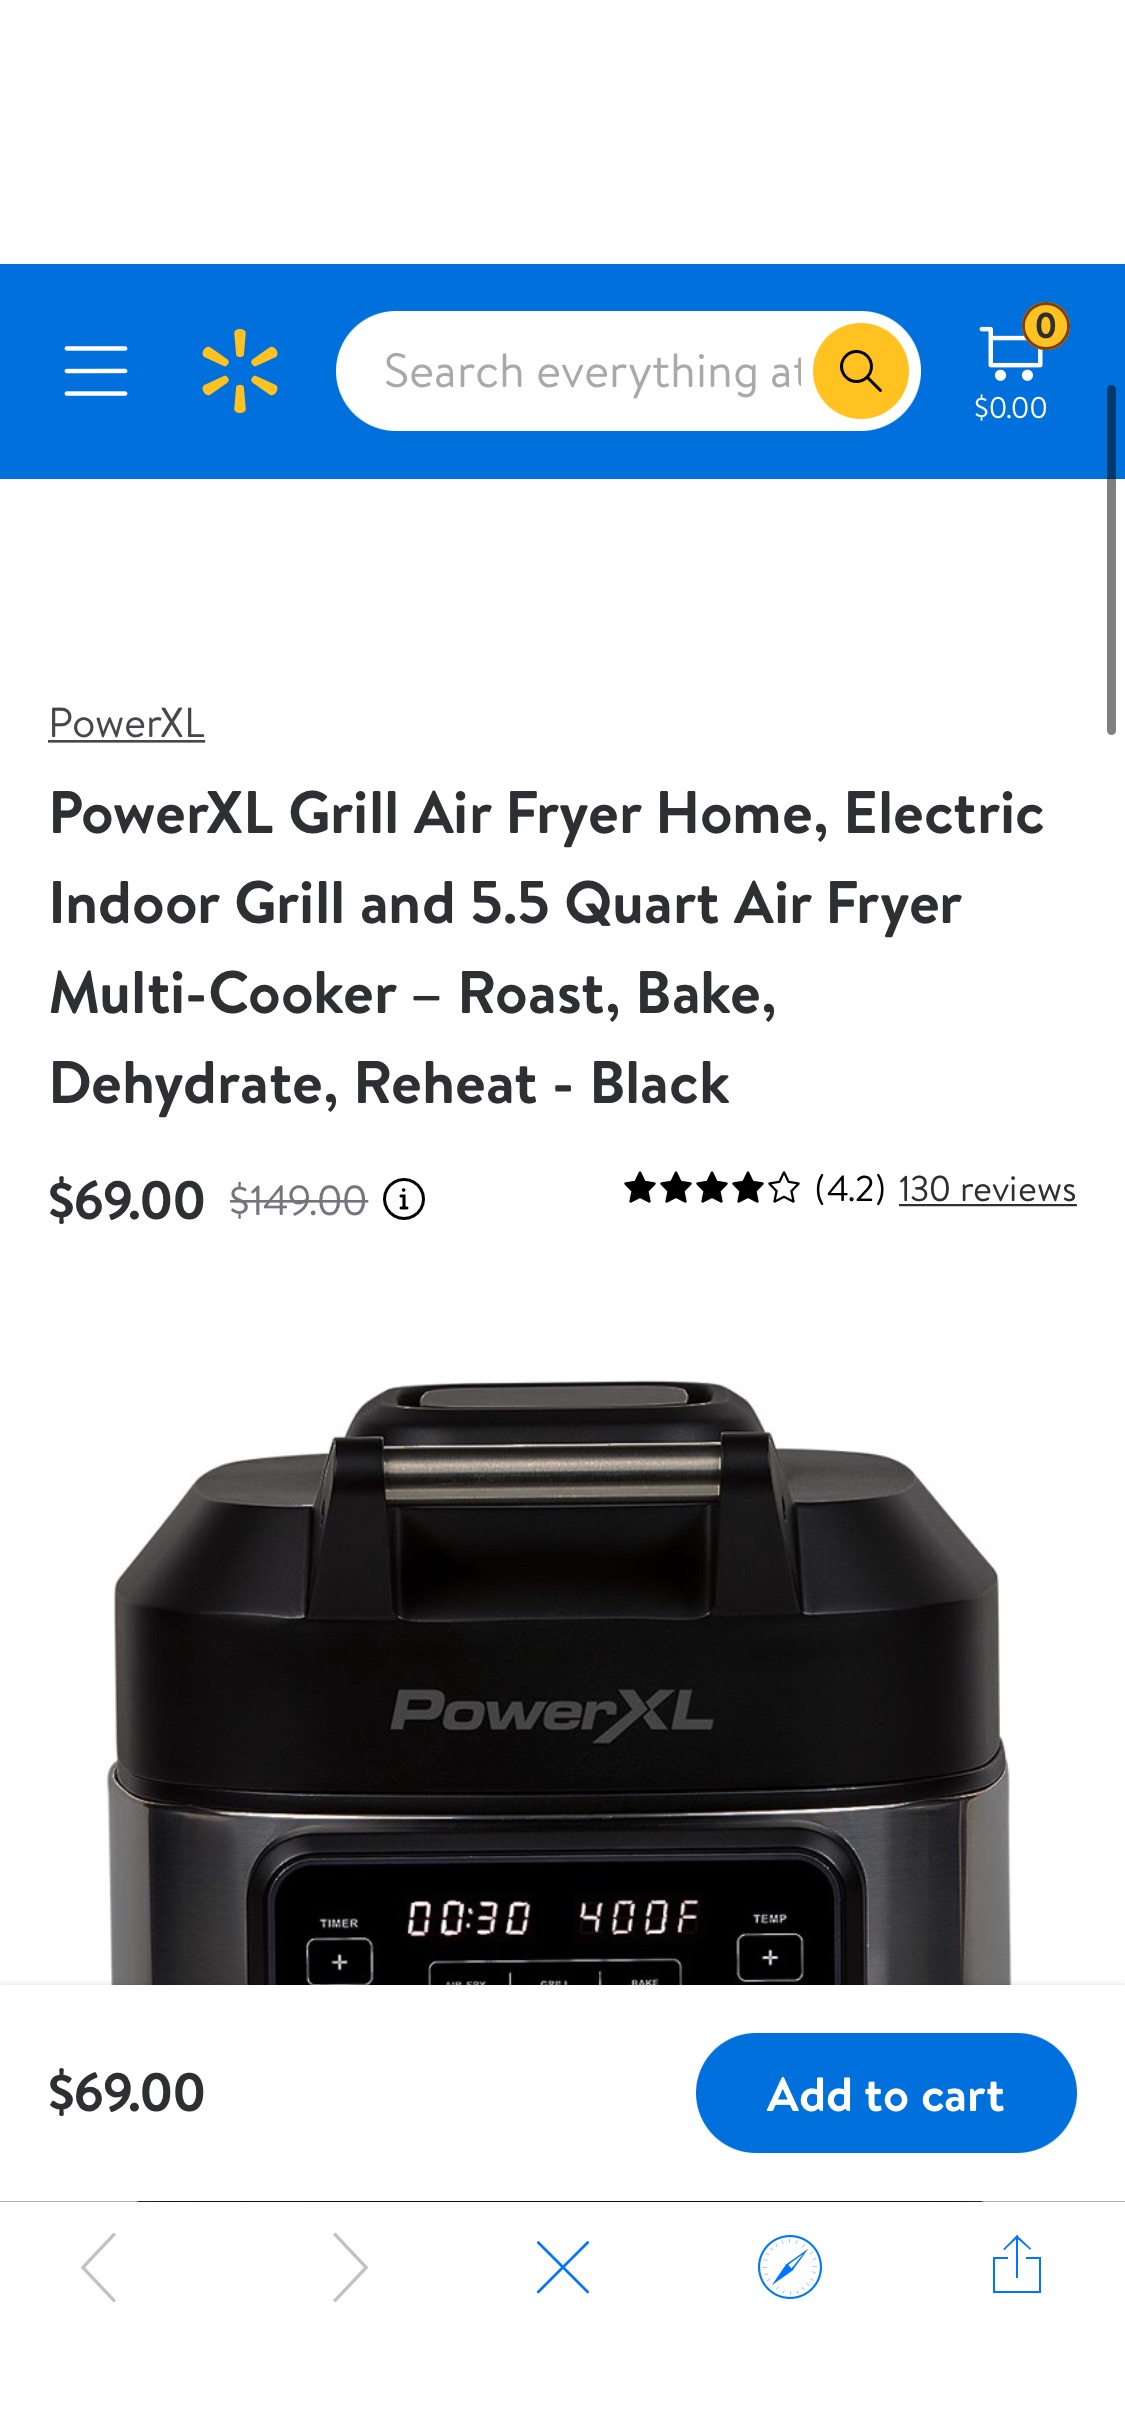 PowerXL Grill Air Fryer Home, Electric Indoor Grill and 5.5 Quart Air Fryer Multi-Cooker – Roast, Bake, Dehydrate, Reheat - Black - Walmart.com为